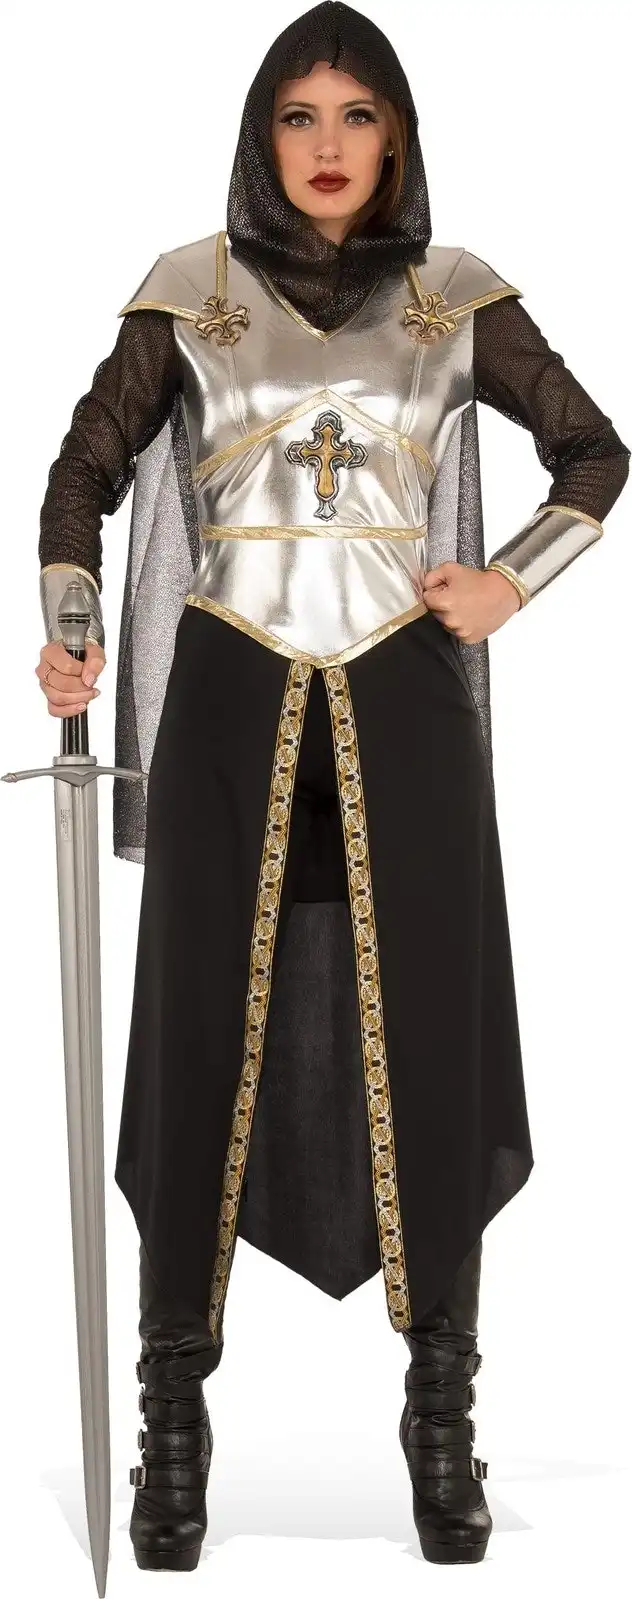 Rubies Medieval Warrior Back In TIme Women's Dress Up Costume Size Standard